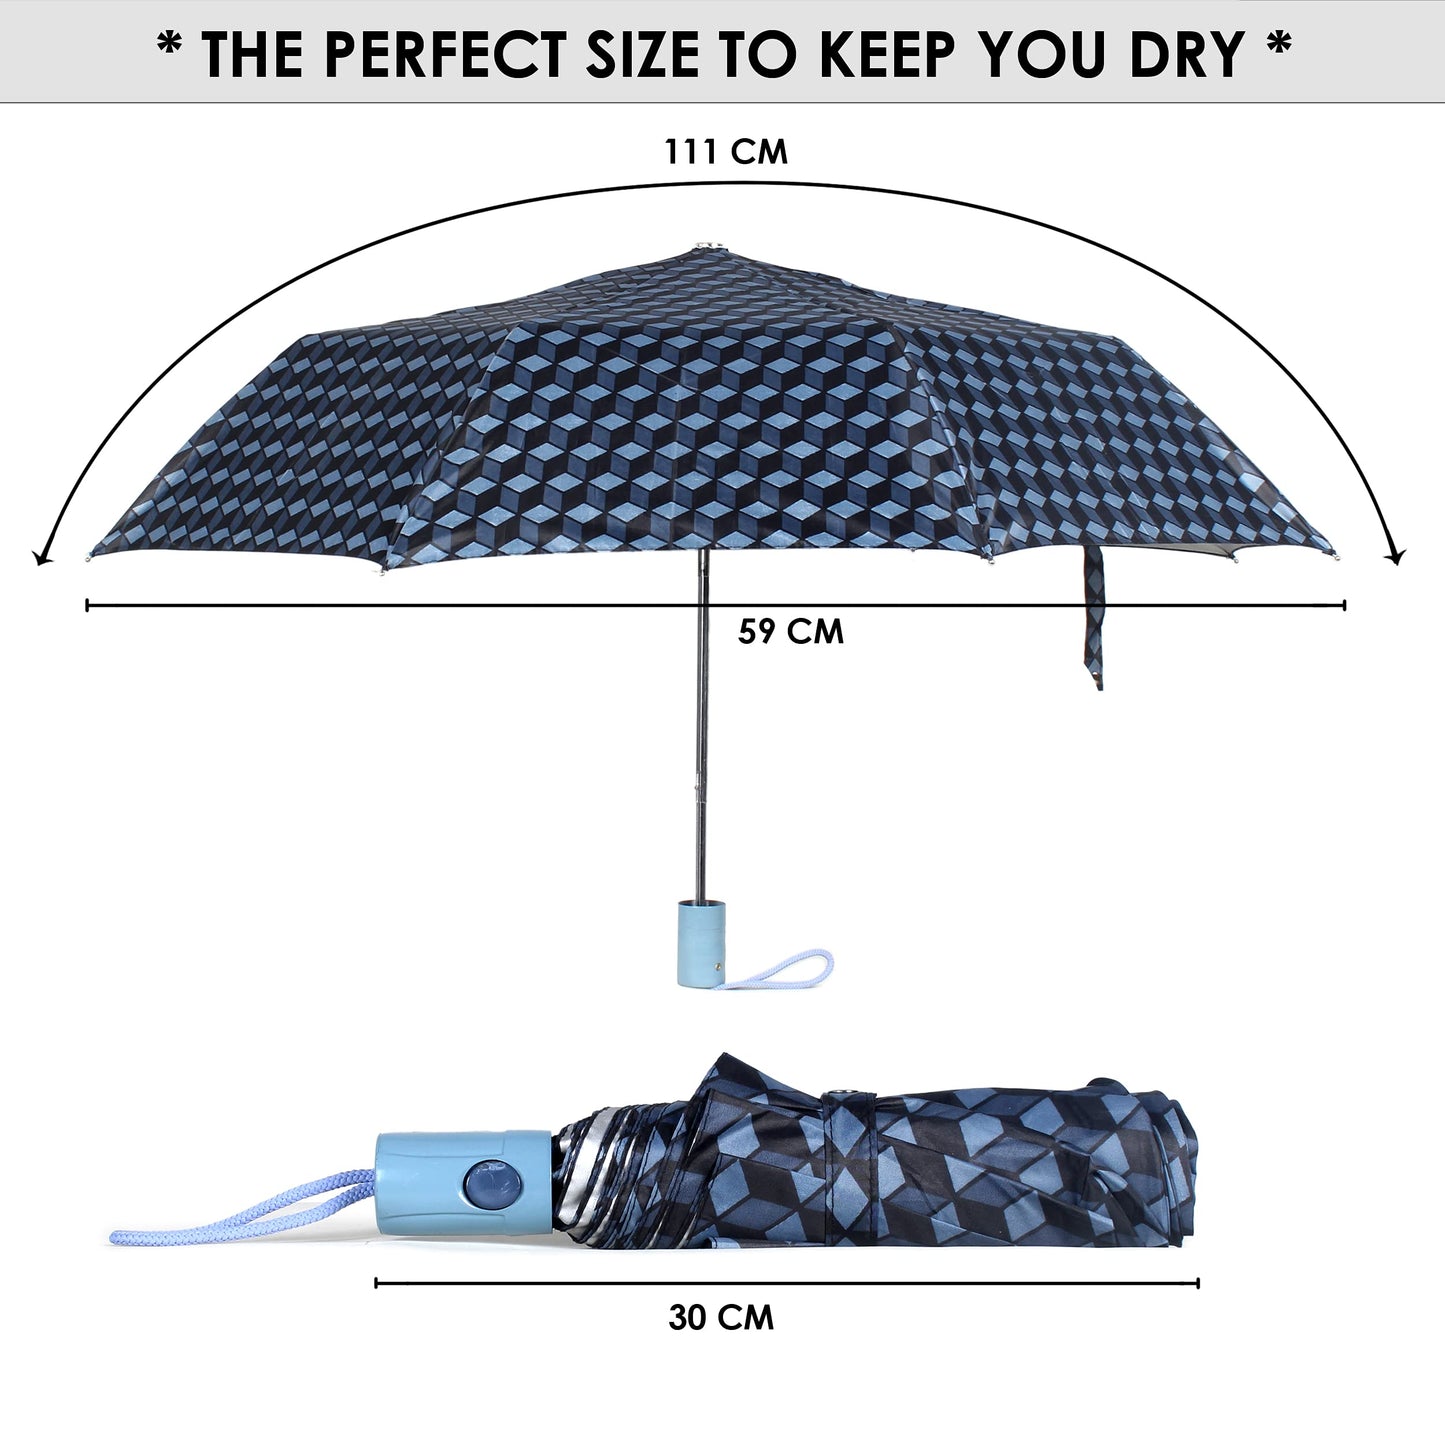 THE CLOWNFISH Umbrella 3 Fold Auto Open Waterproof 190 T Polyester Double Coated Silver Lined Umbrellas For Men and Women (Checks Design- Sky Blue)